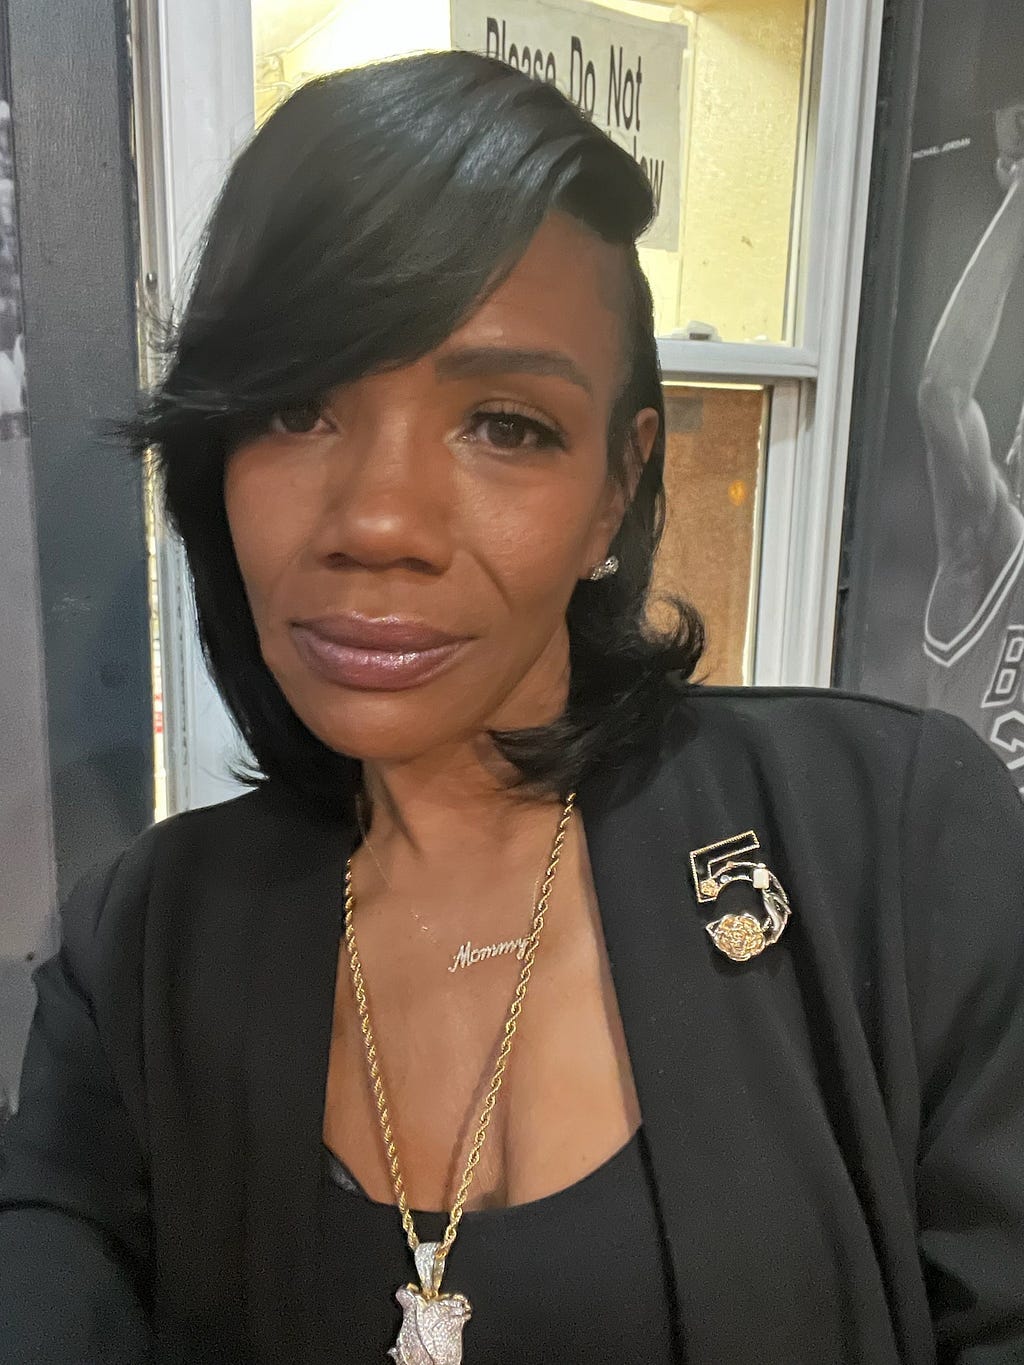 A Black woman with a sleek side parted bob haircut wearing a stylish black suit with gold jewelry takes a selfie.